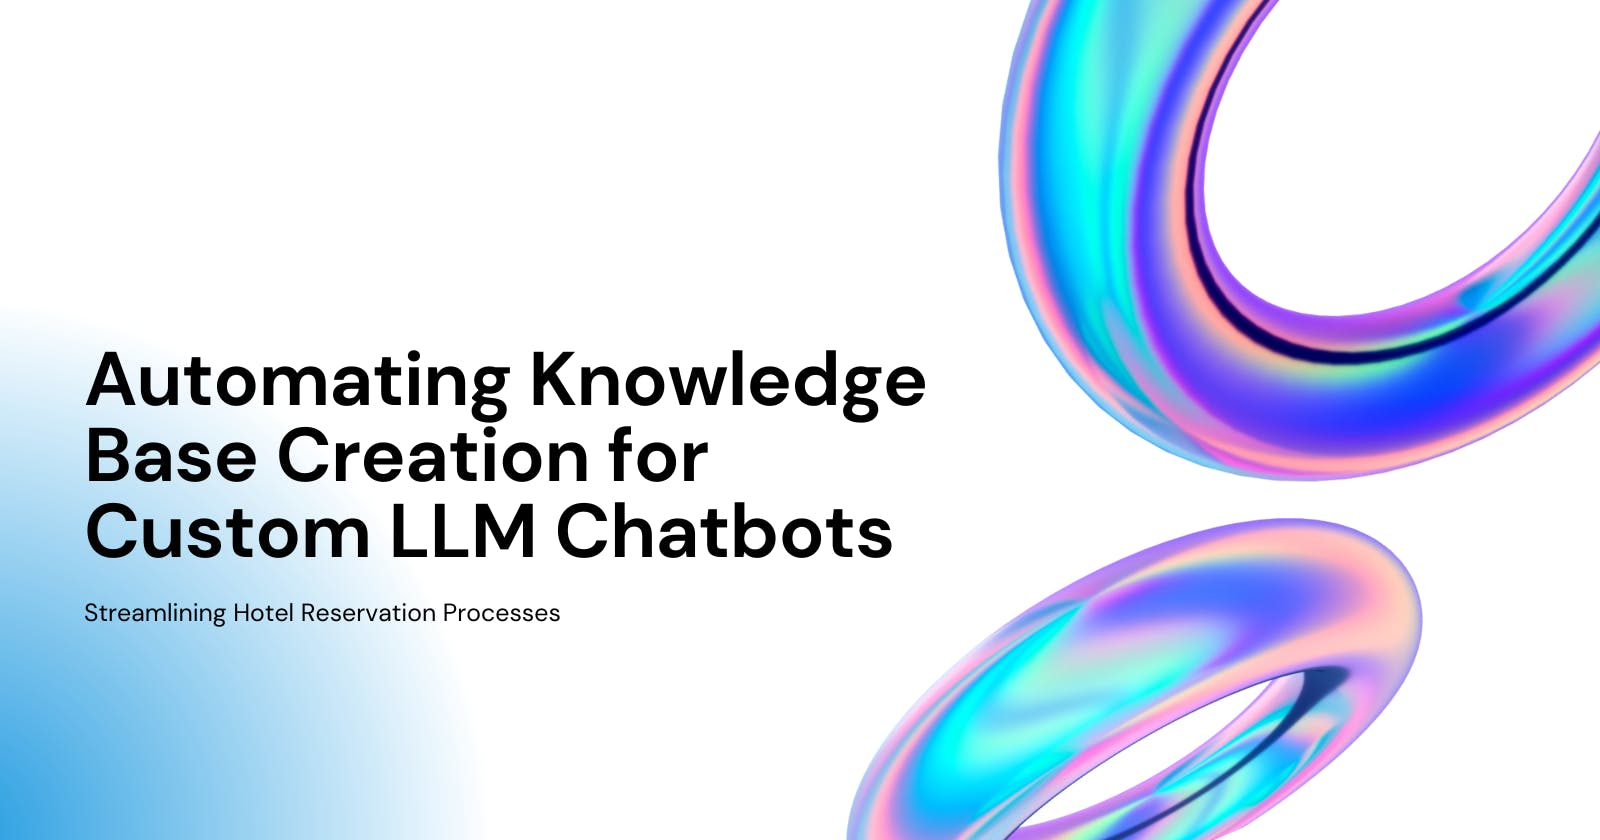 Automating Knowledge Base Creation for Custom LLM Chatbots